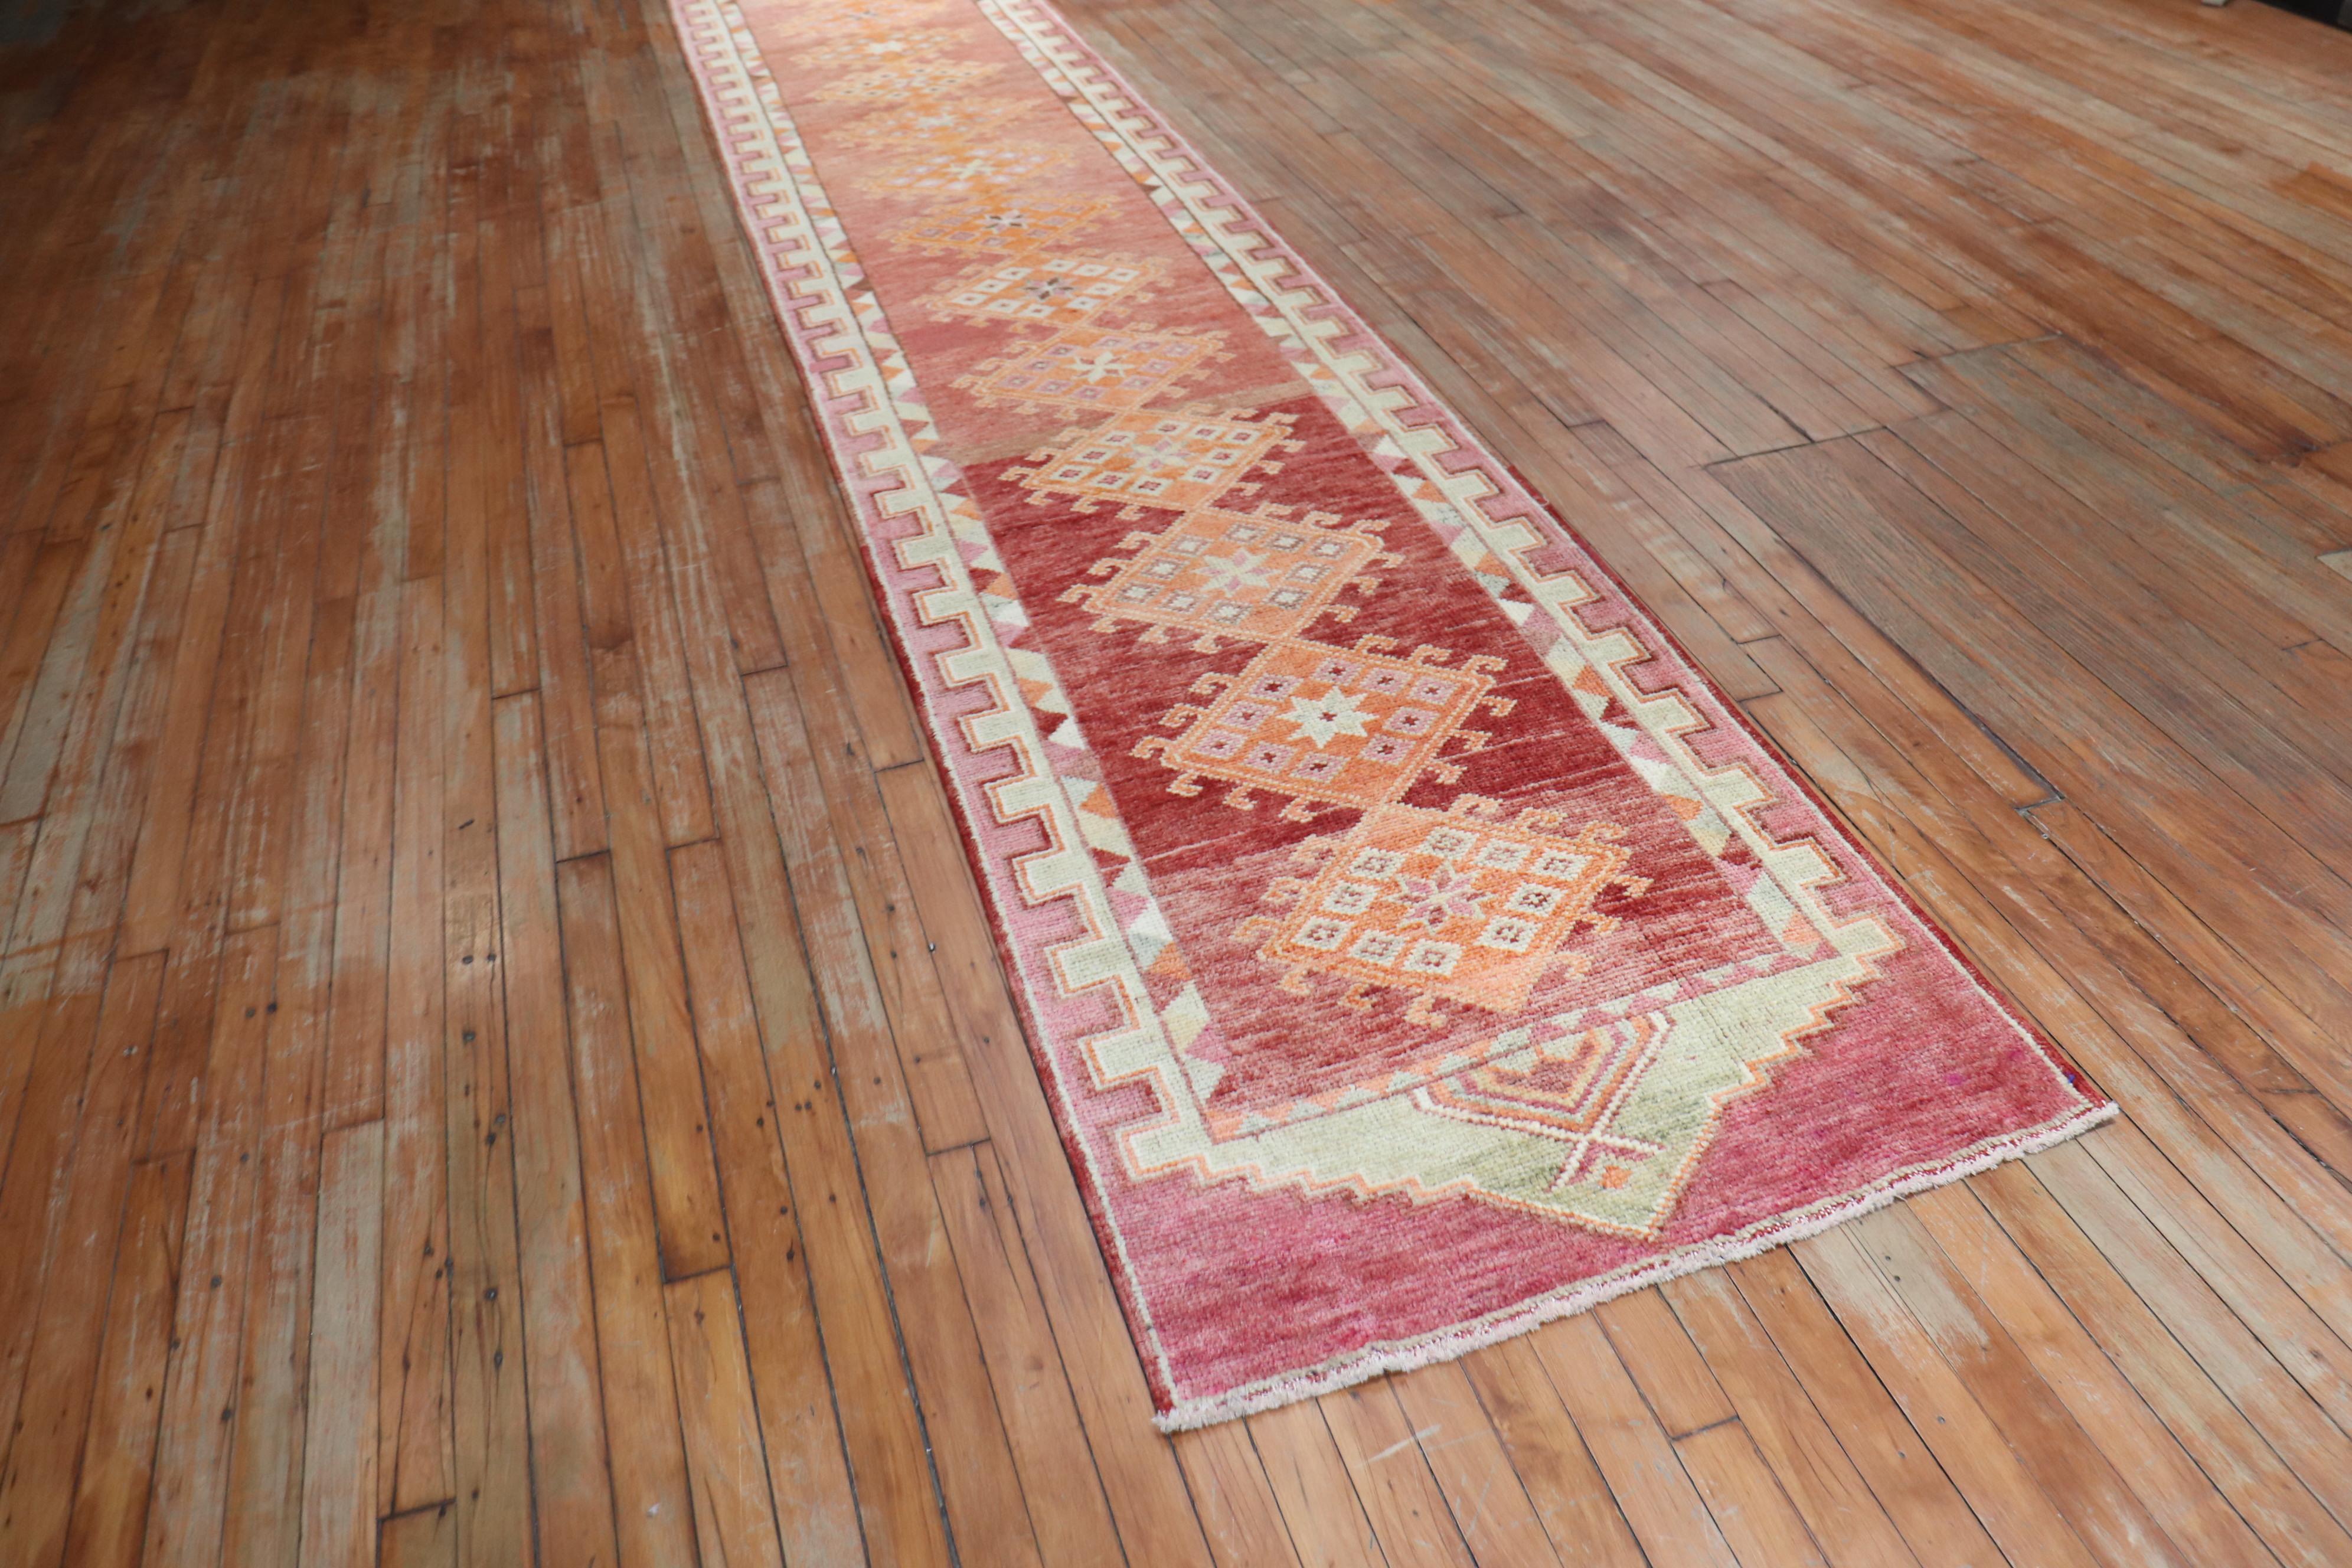 Long vintage Turkish Anatolian runner with a striated burnt red field multiple orange color medallions

Measures: 2'10